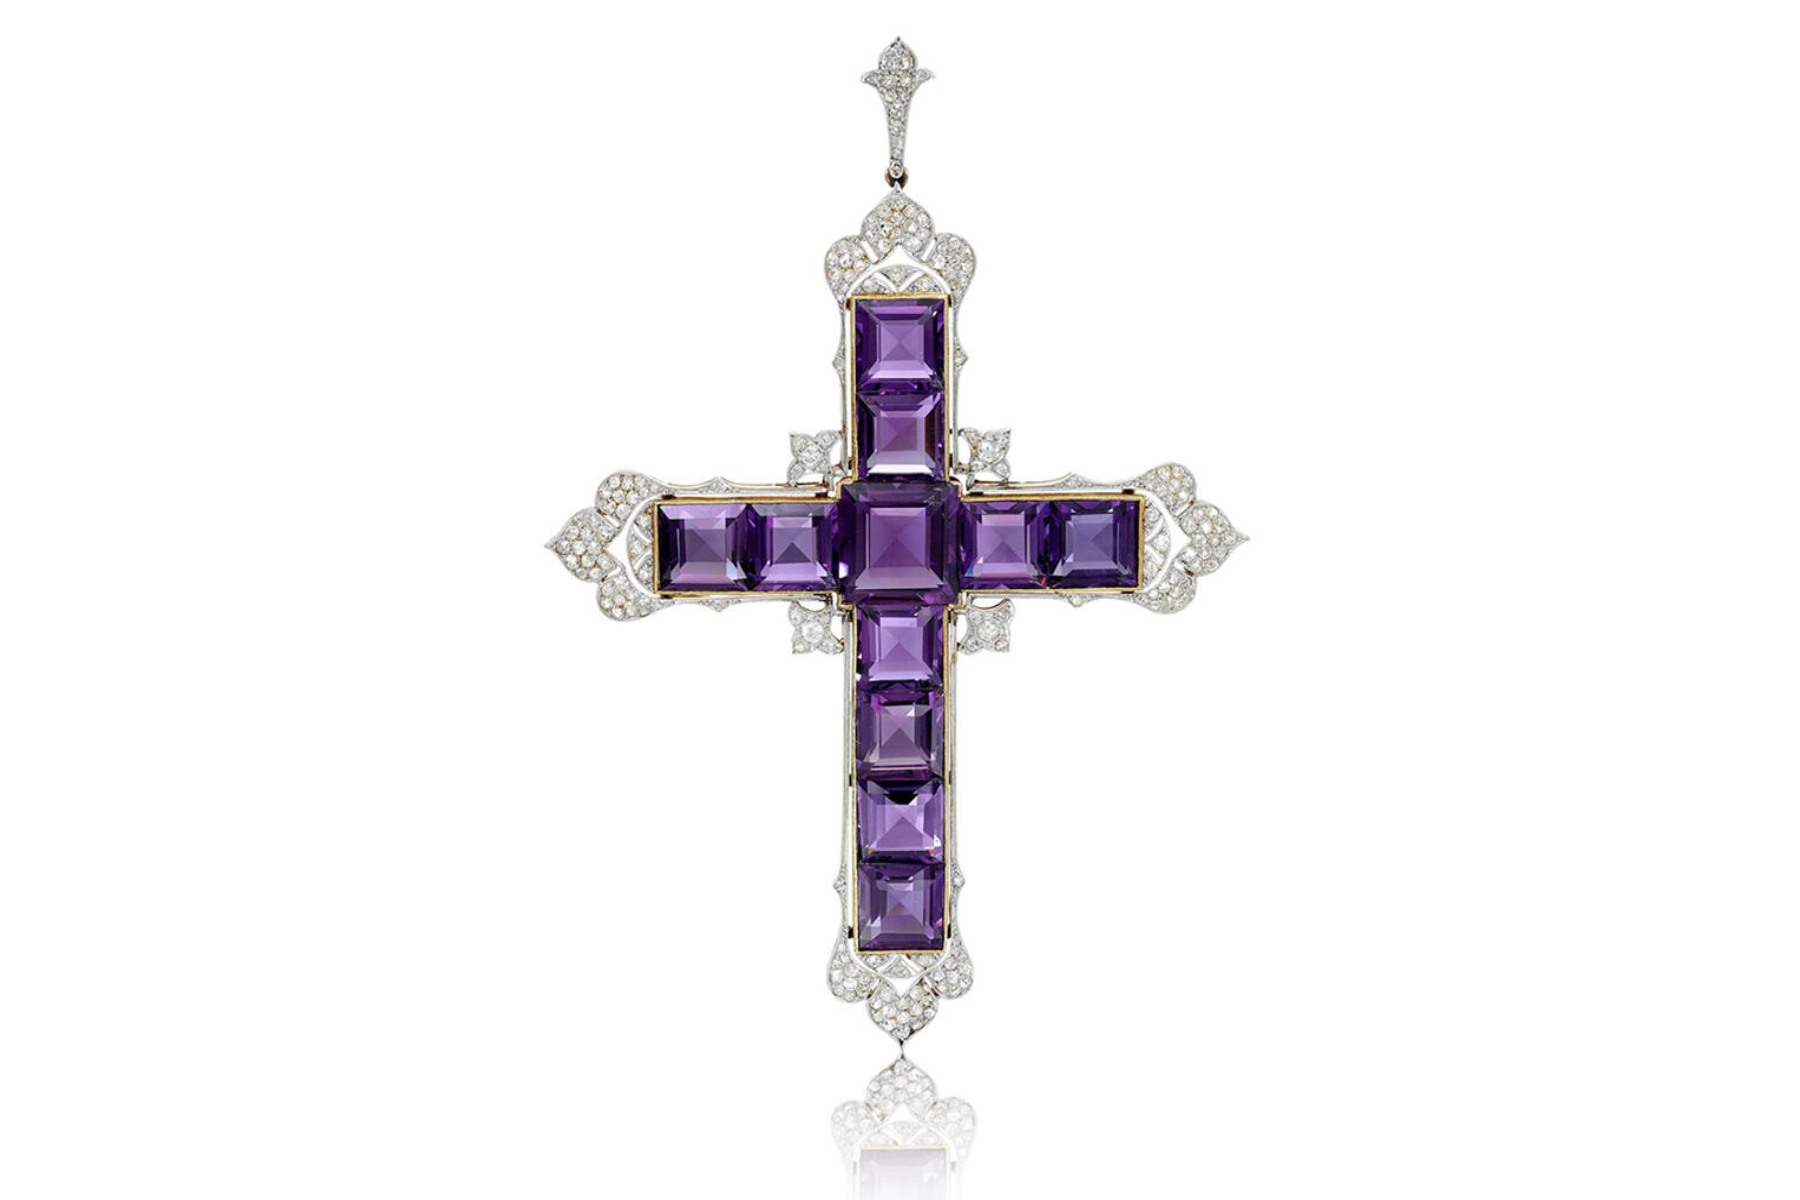 136 mm wide by 95 mm tall cross pendant with 5.25 diamond carats and 11 amethysts